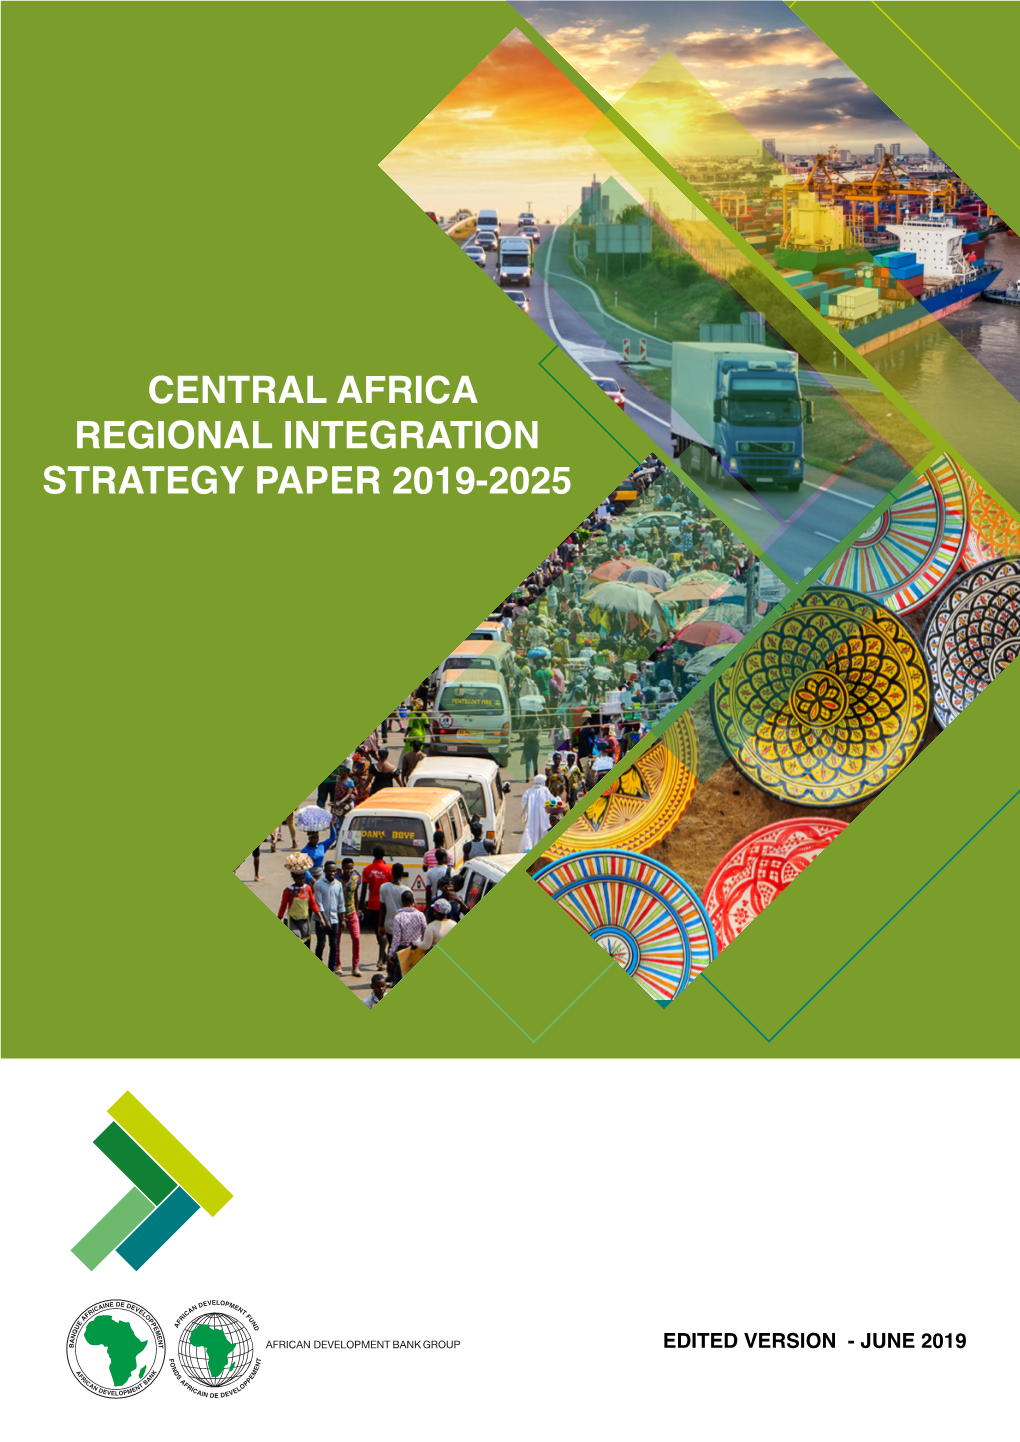 Central Africa Regional Integration Strategy Paper 2019-2025